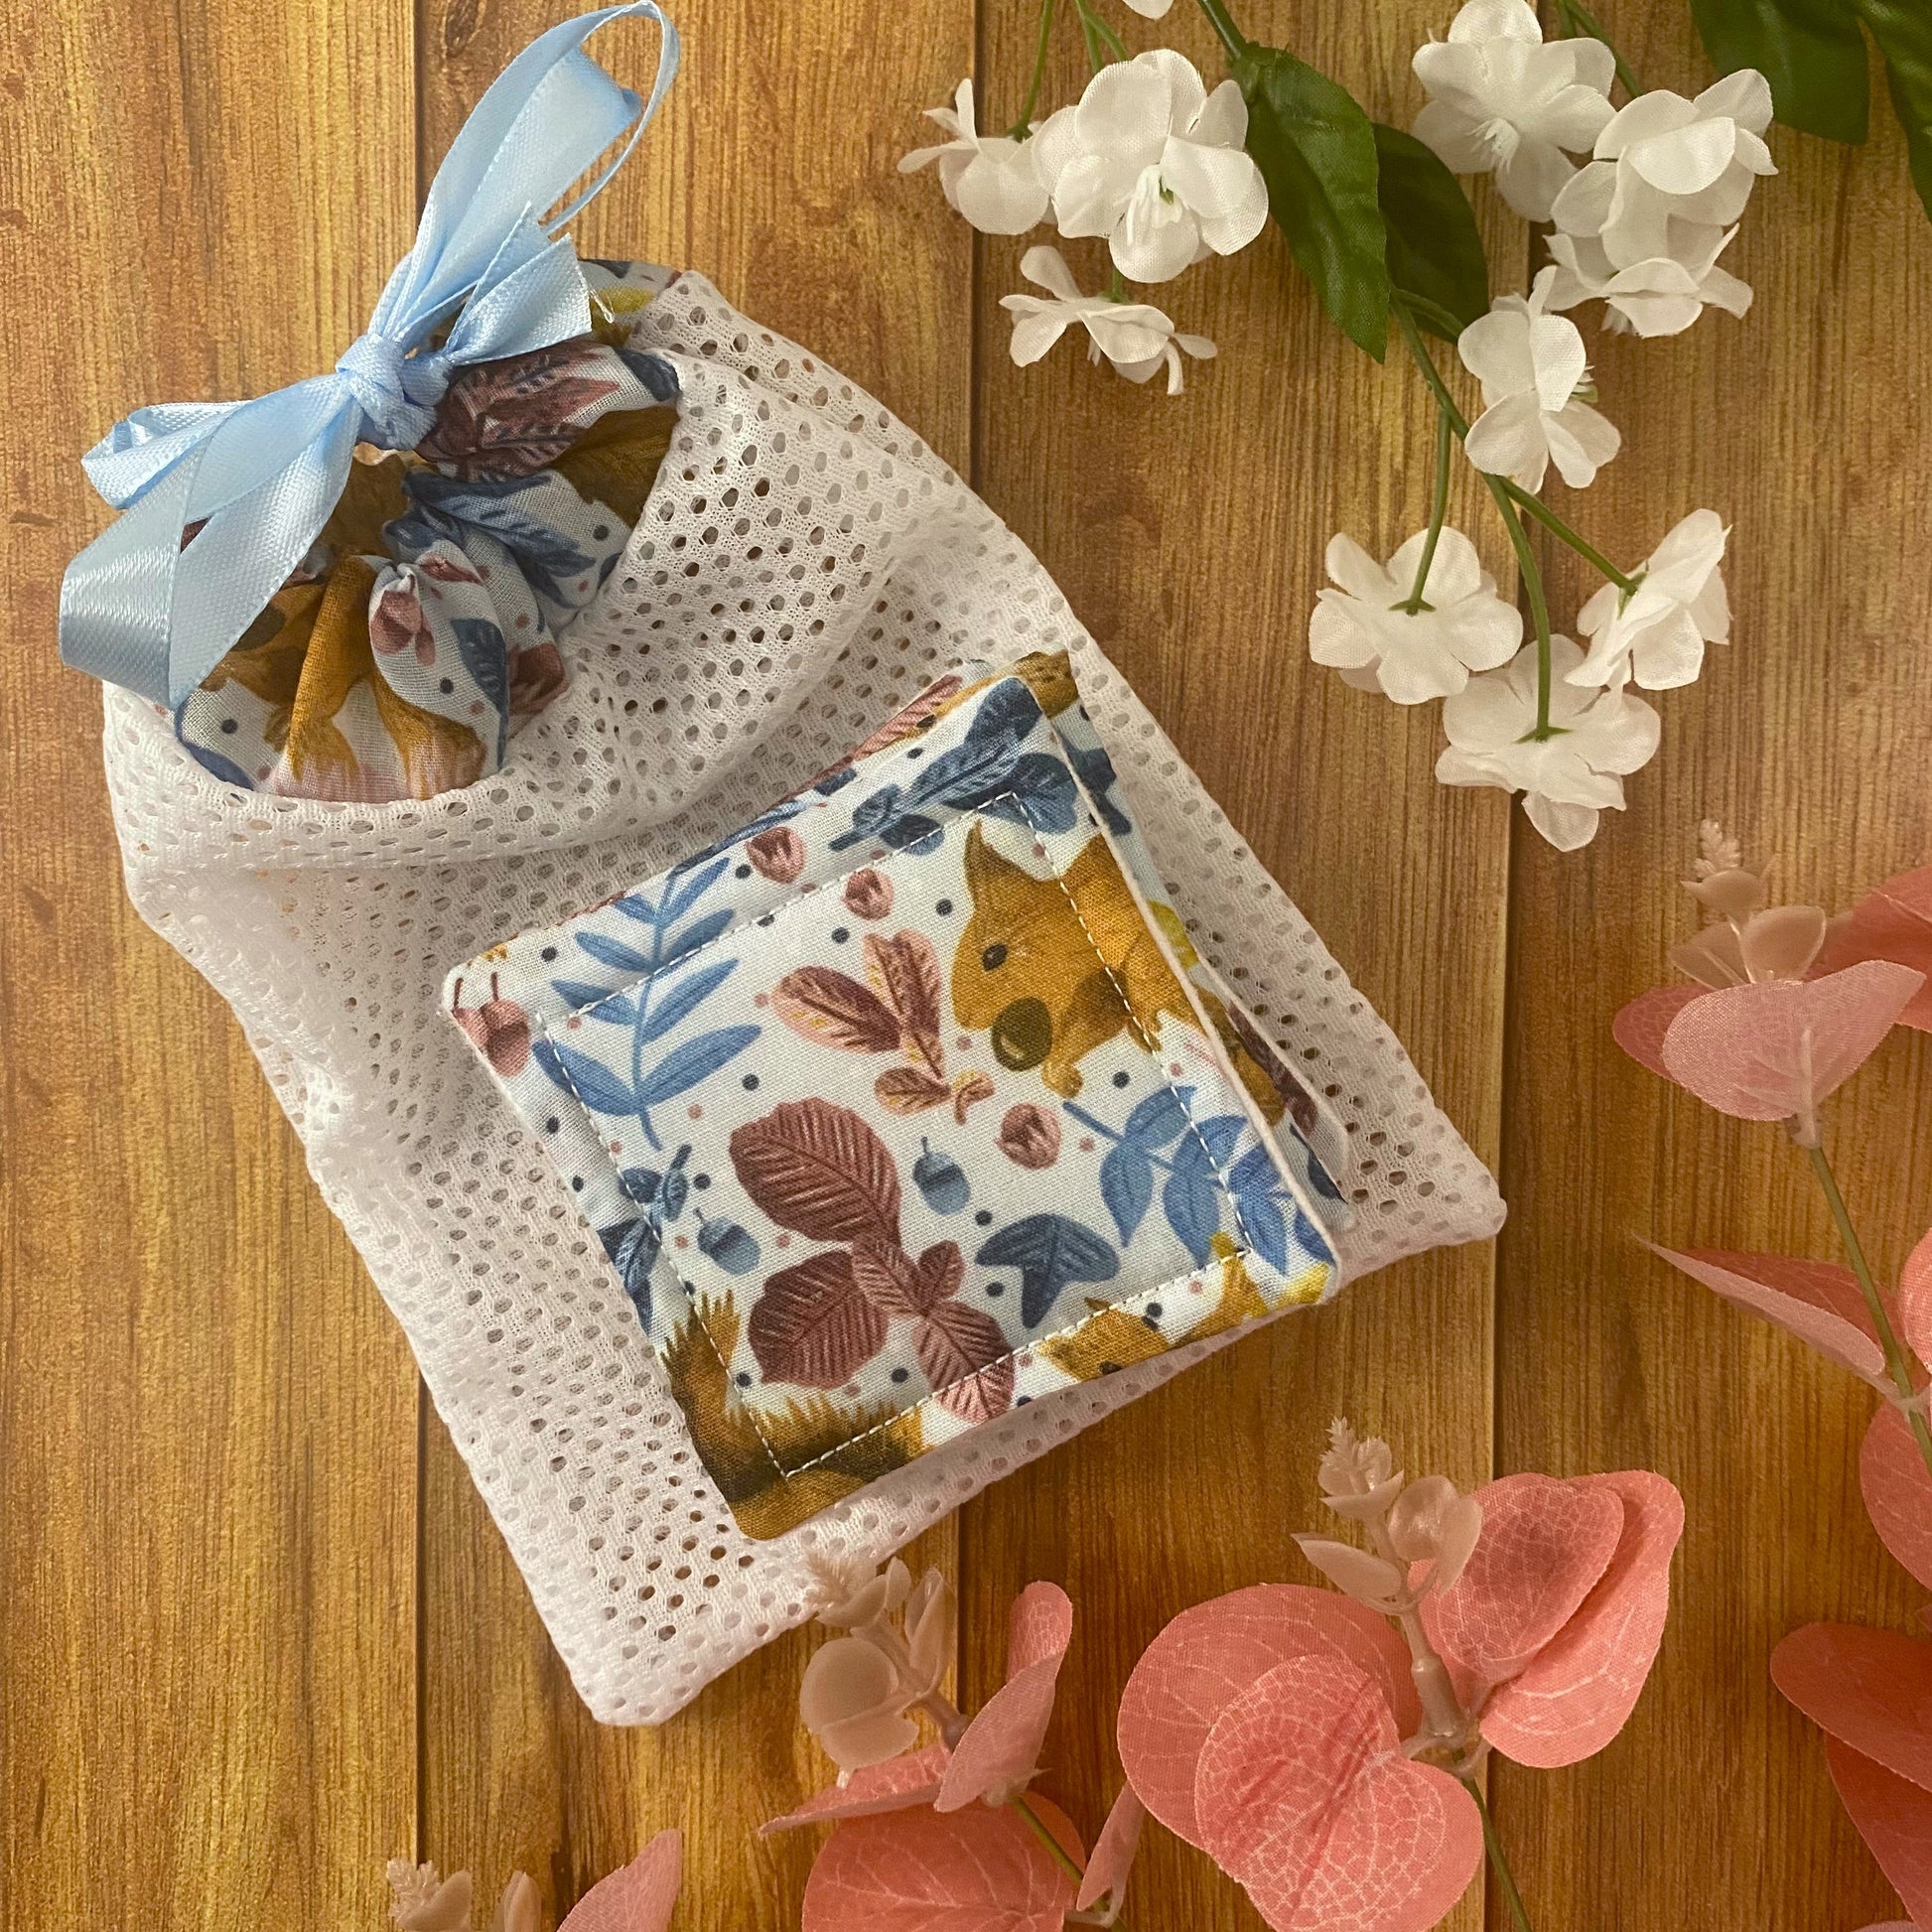 red squirrel patterned skincare pads and washbag on wooden background